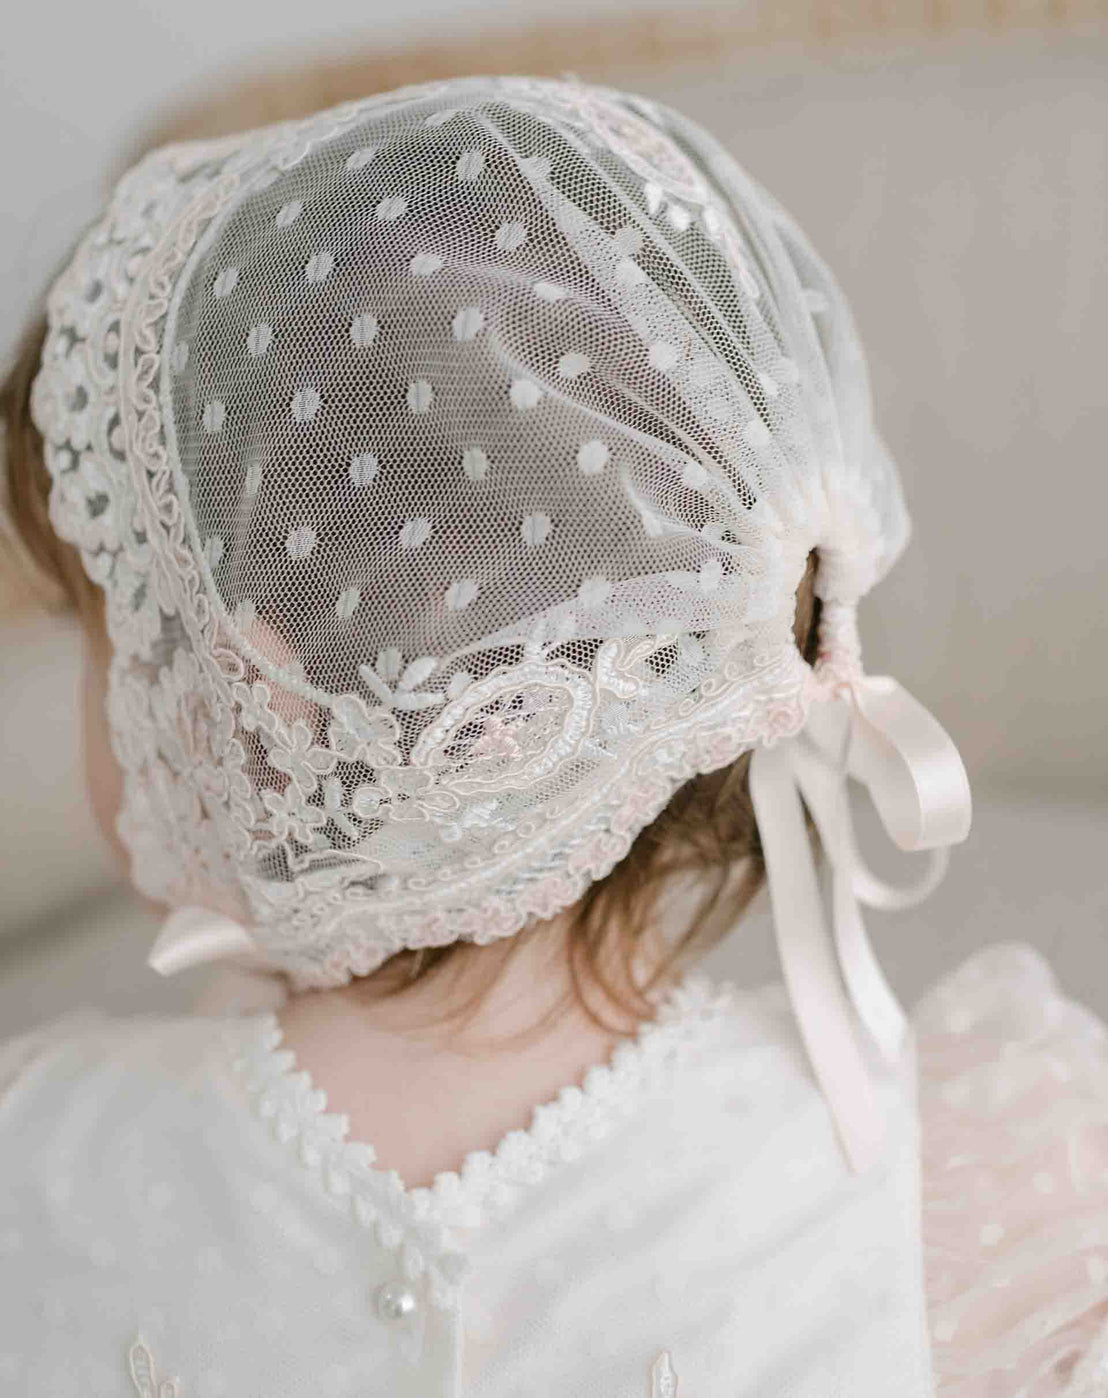 A baby girl wearing the Elizabeth Christening Gown Bonnet viewed from behind. The bonnet features a polka dot lace pattern, secured with a soft pink ribbon. The bonnet is sheer and embroidered with floral details.